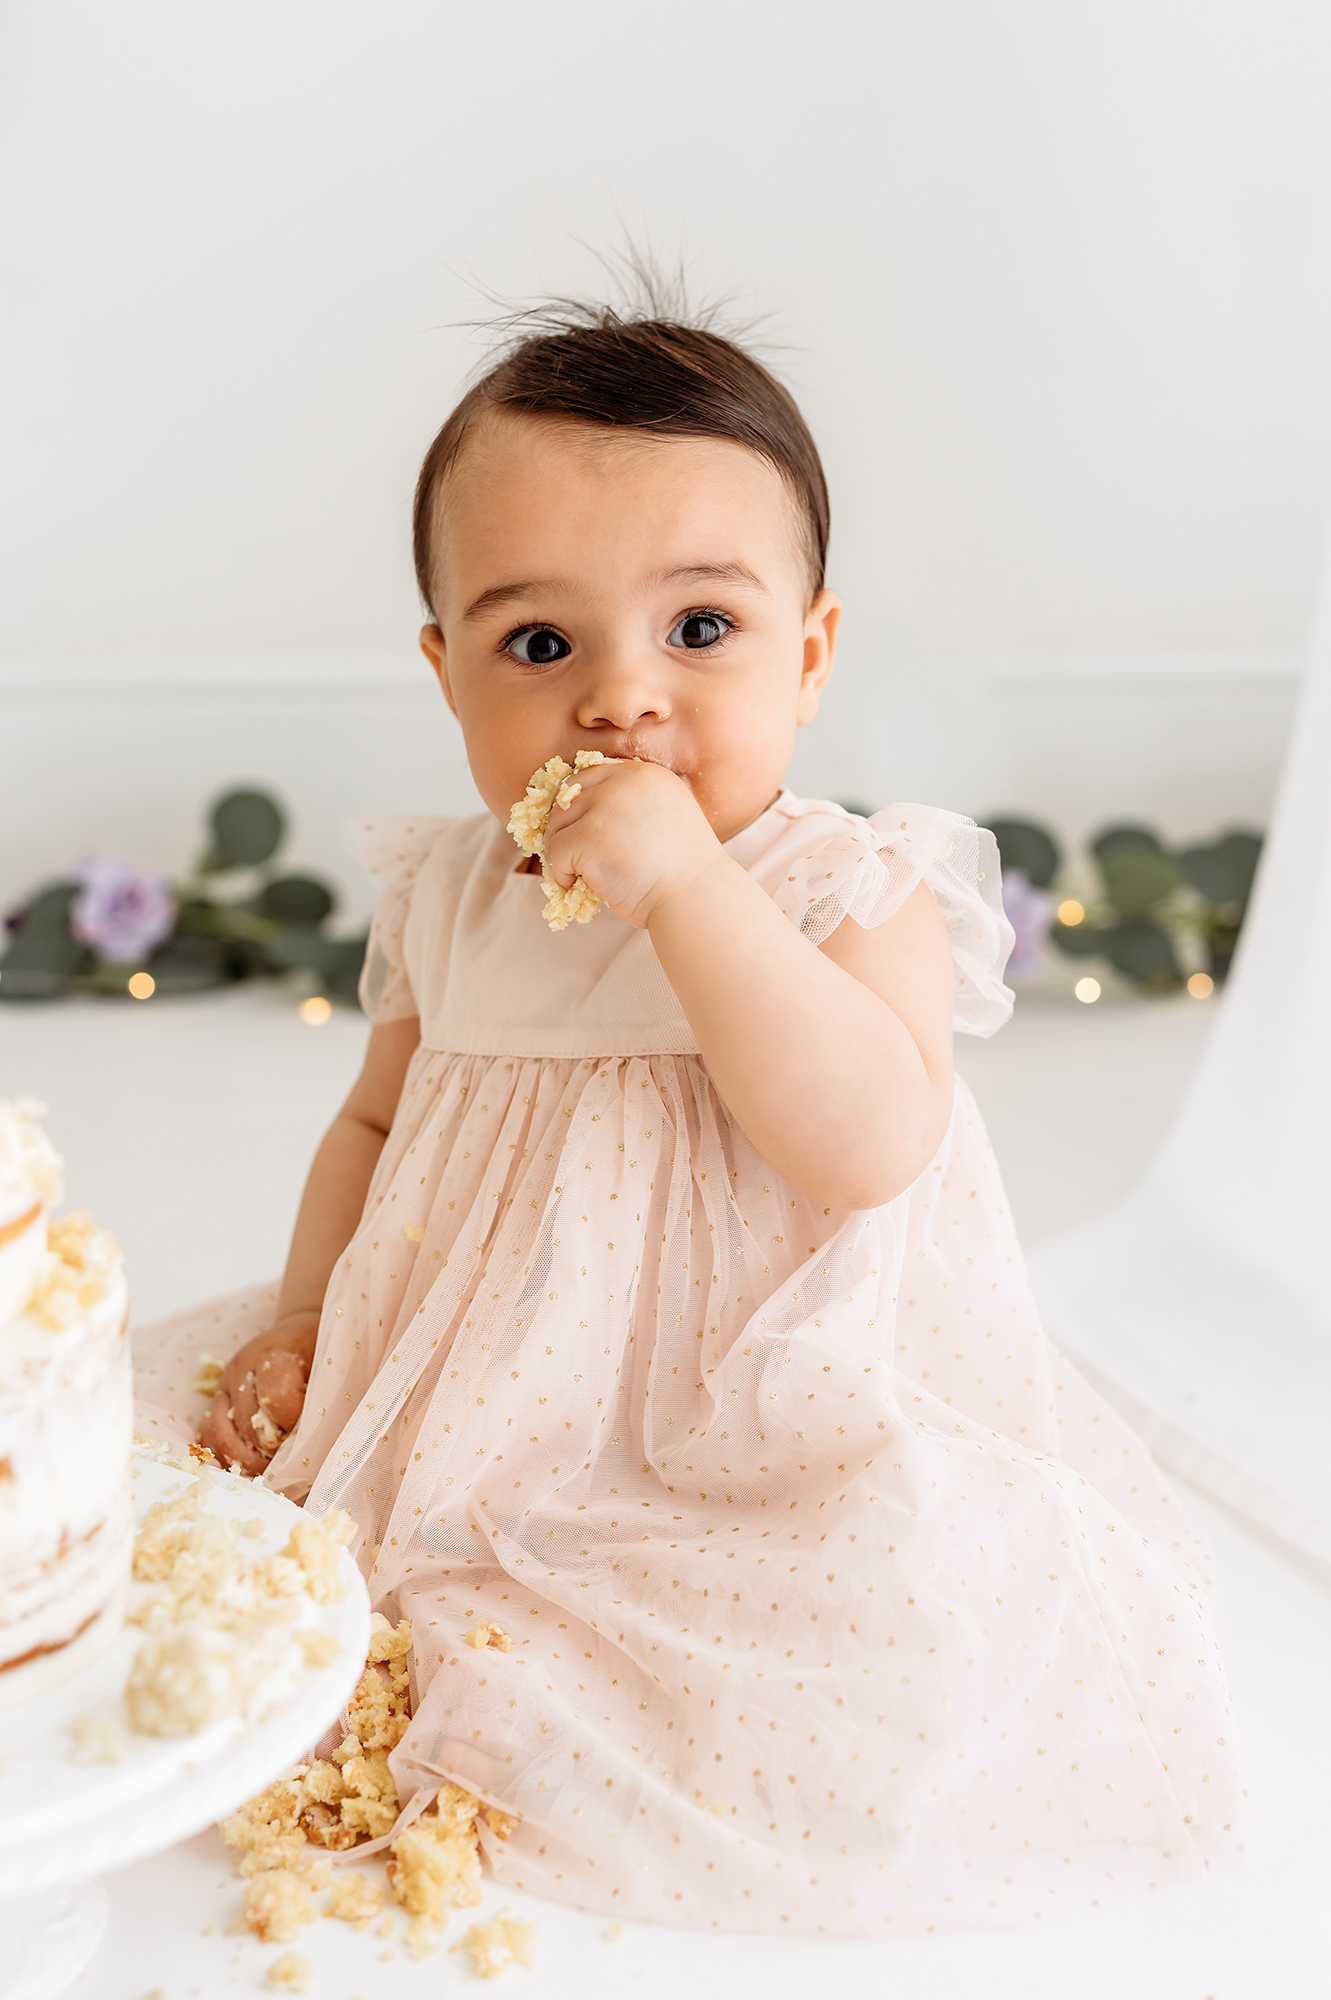 photoshoot with mamas & papas - baby girl taking a lot of cake